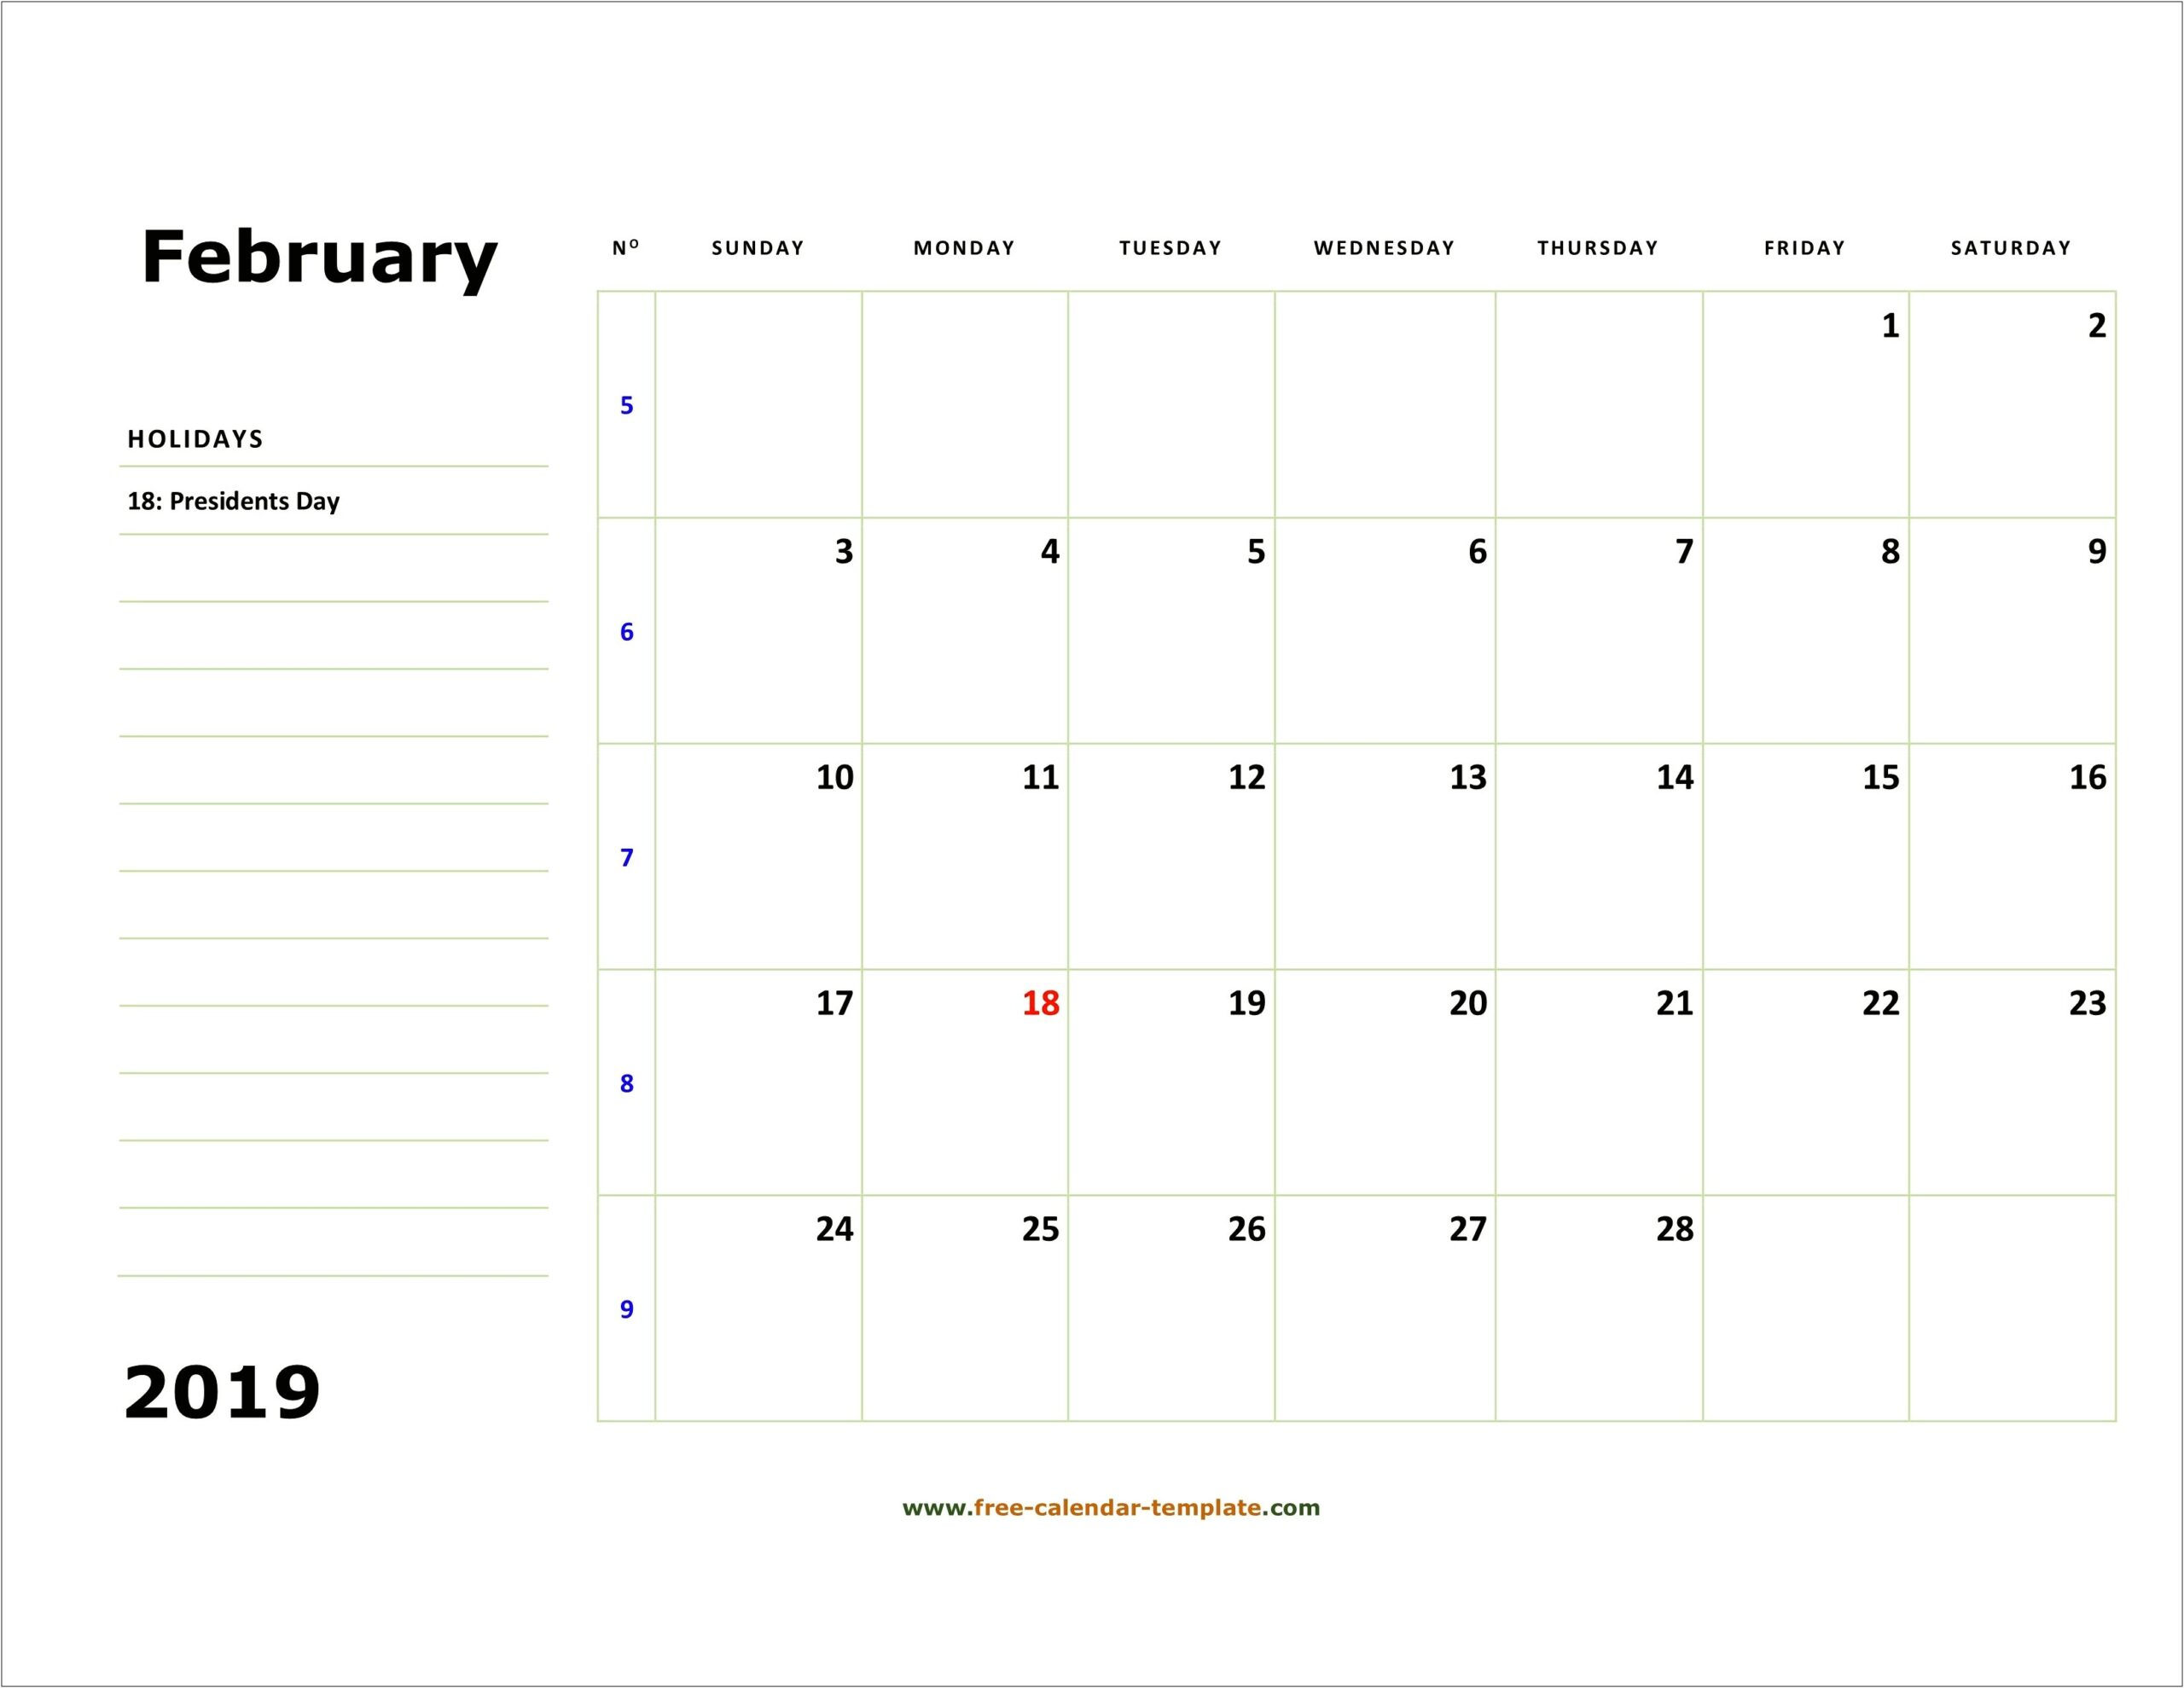 Free Monthly Calendar Template February 2019